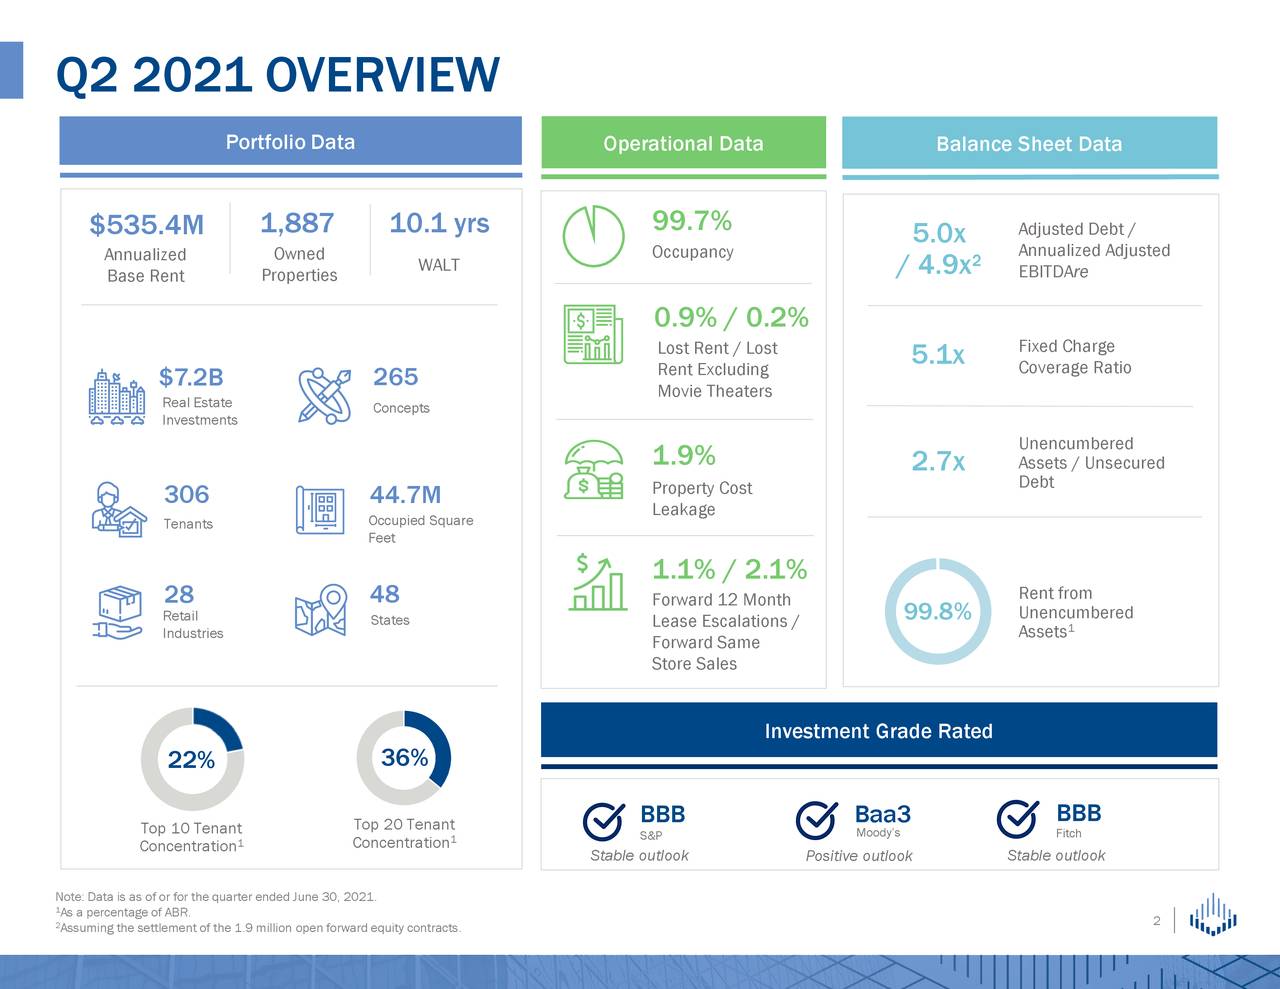 Q2 2021 OVERVIEW